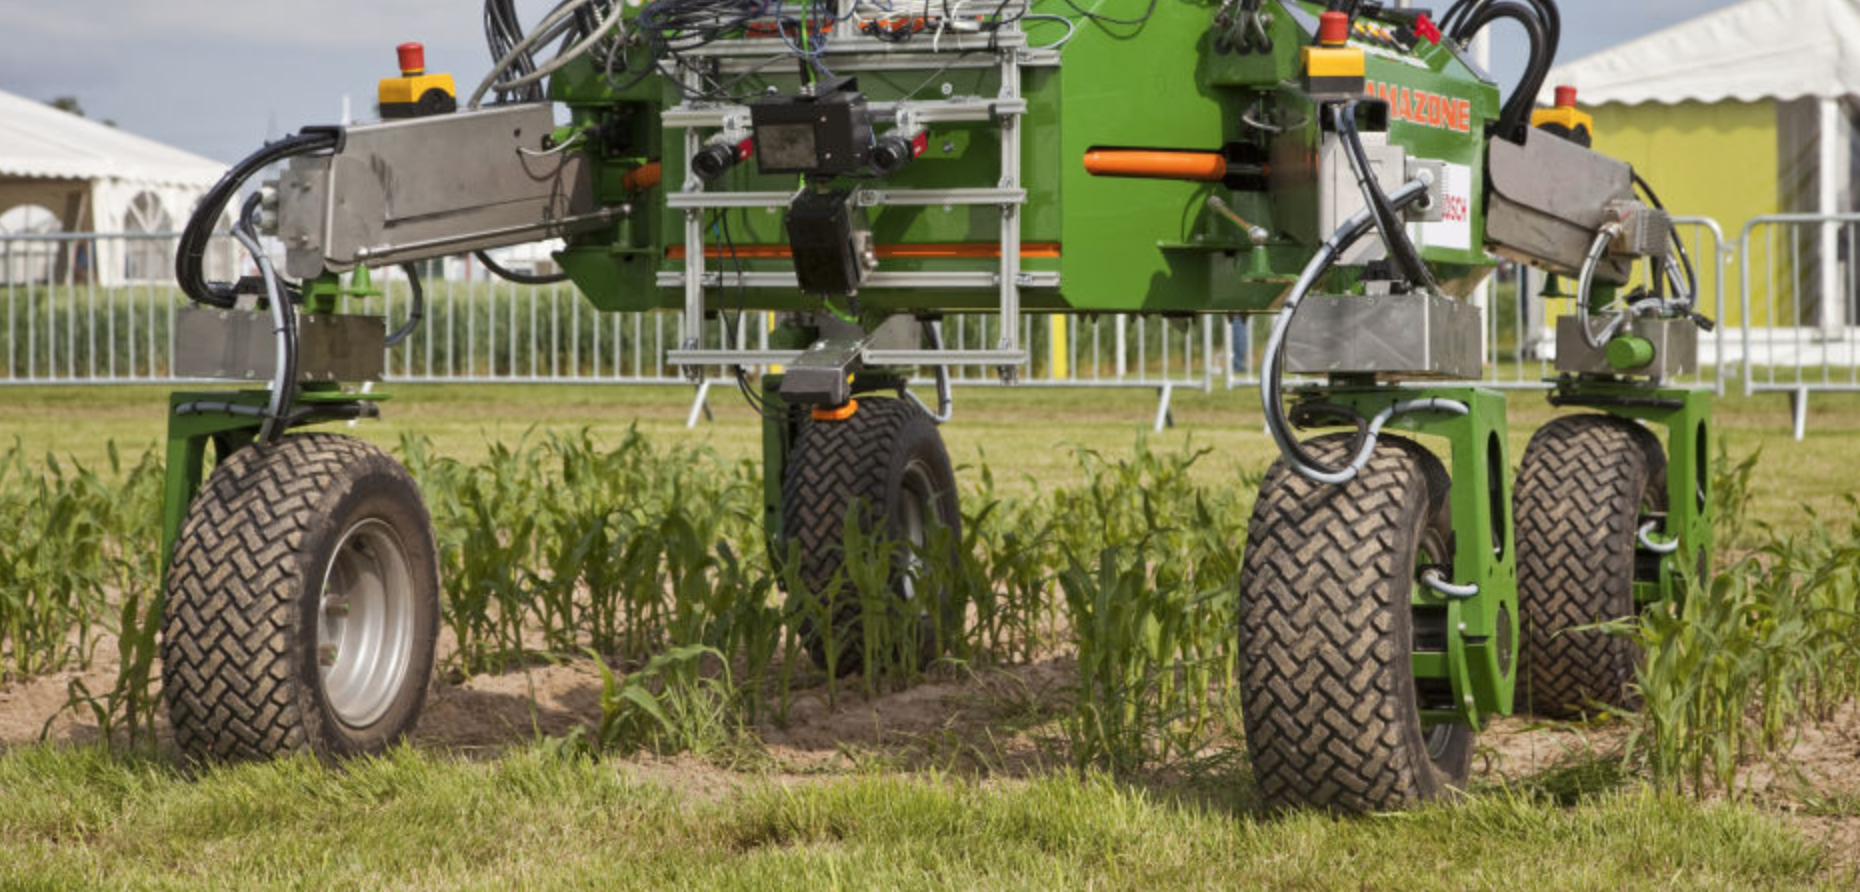 Agricultural Robots - Present and Future Applications (Videos Included)